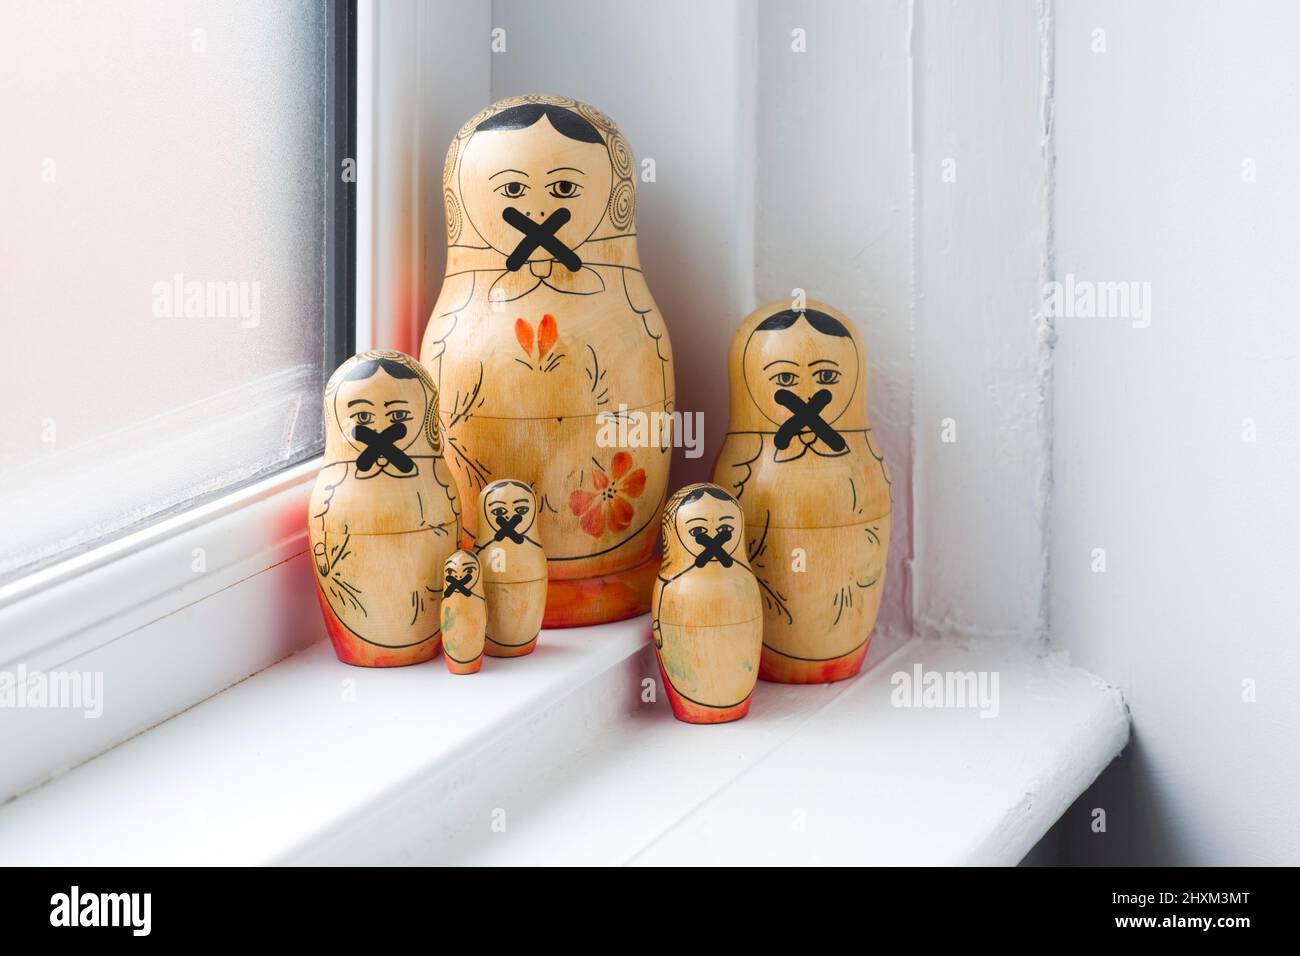 Family of Russian Dolls in a grouping on a window sill with their mouths crossed out so they cannot speak Stock Photo